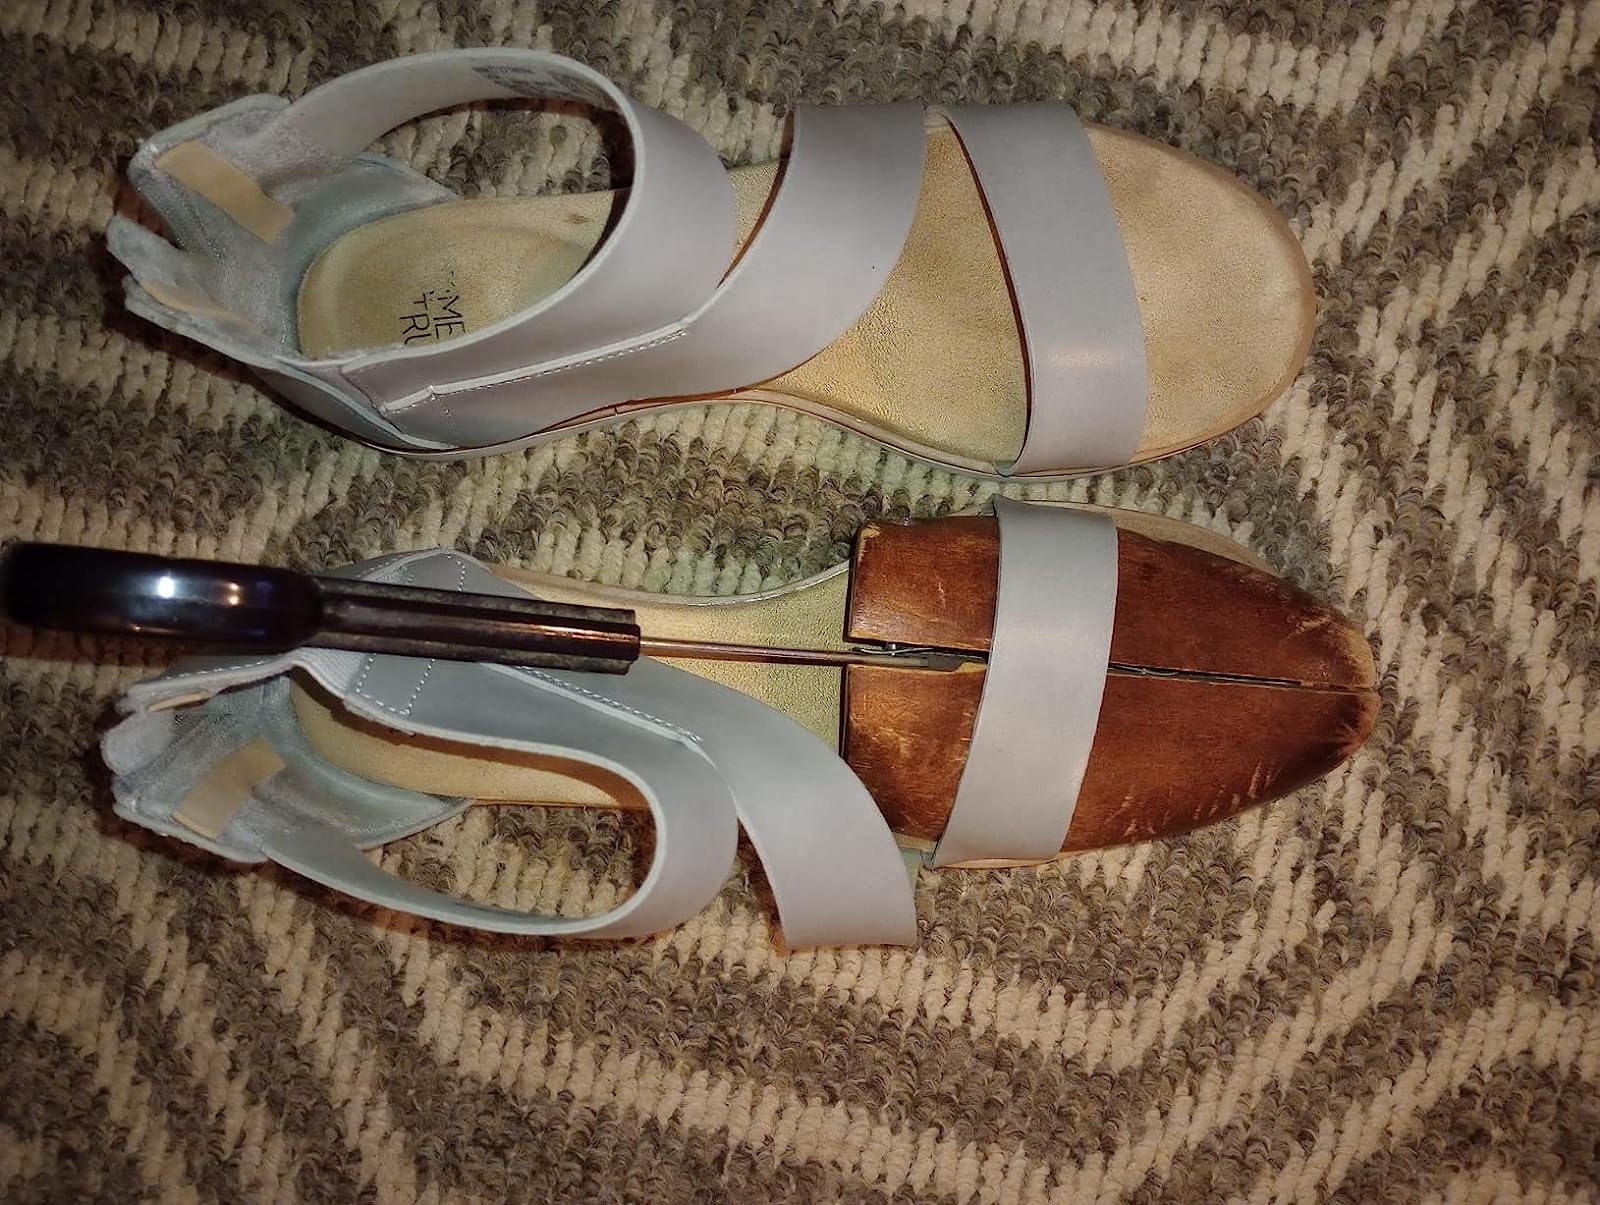 Reviewer’s photo of a pair of sandals with shoe stretcher in one of them